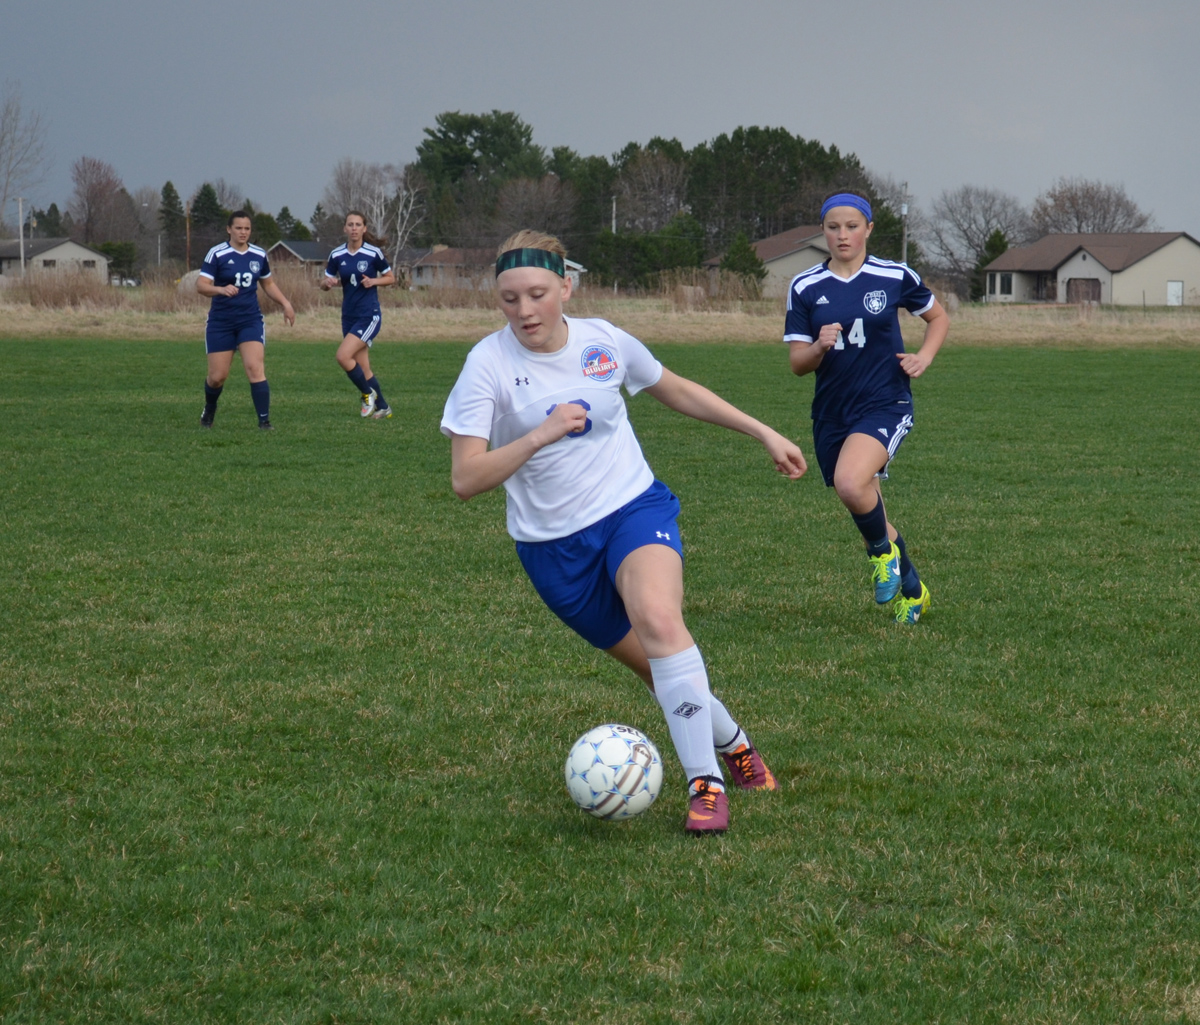 Loss to West puts Bluejays soccer at 0-6 overall